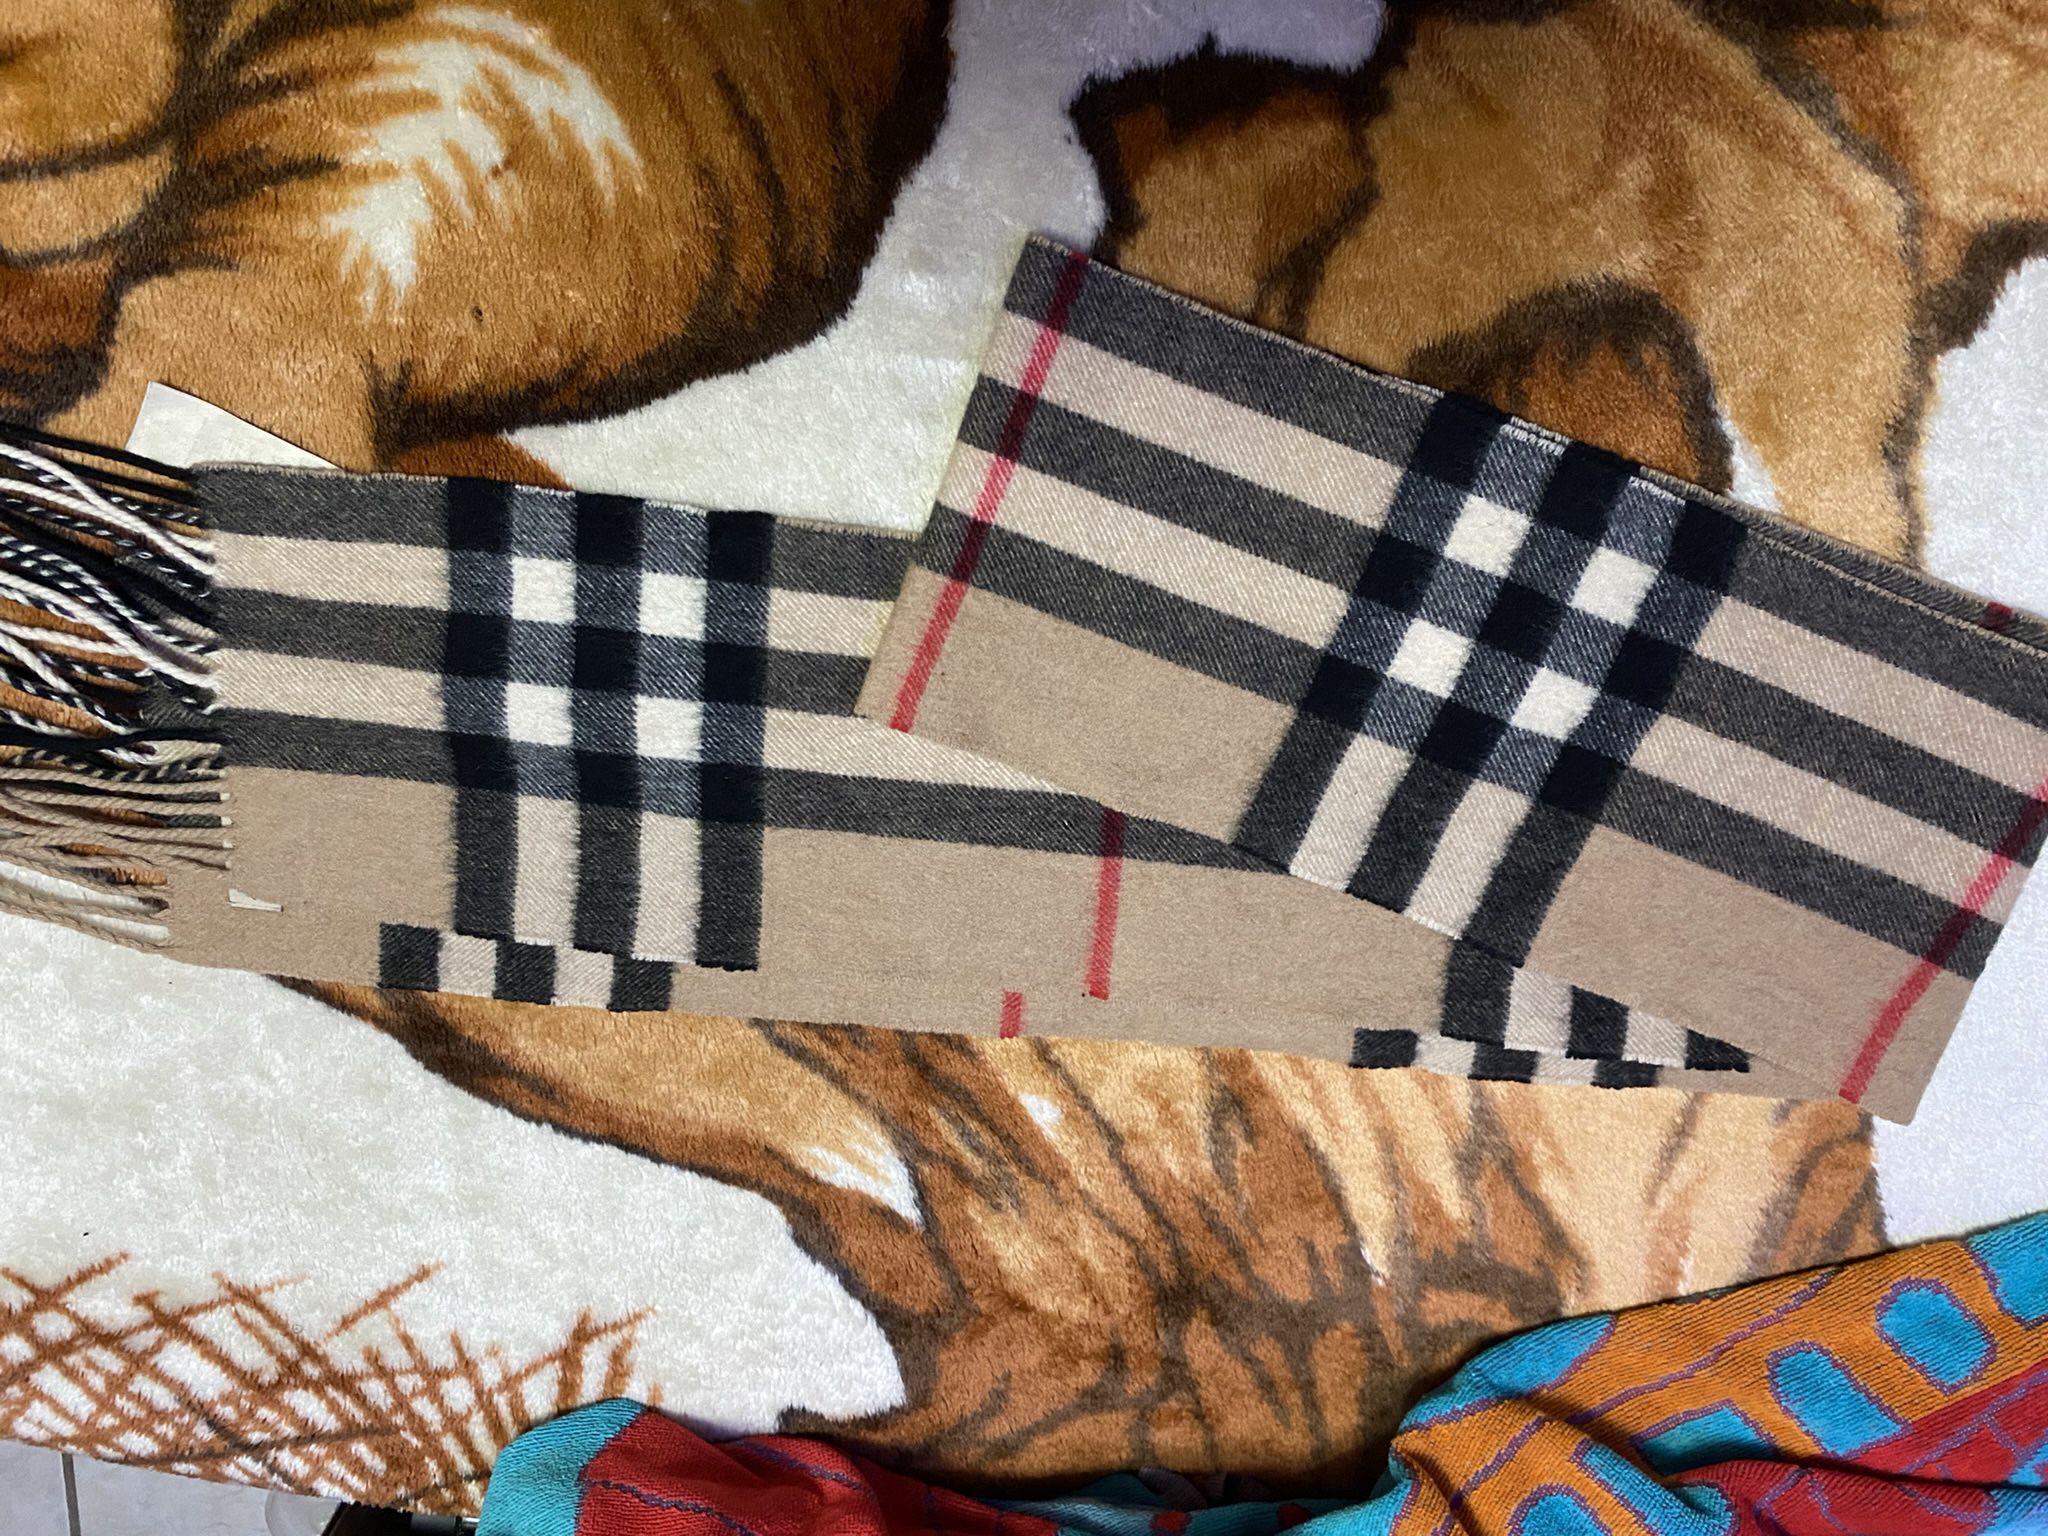 Authentic Burberry Scarf for sale